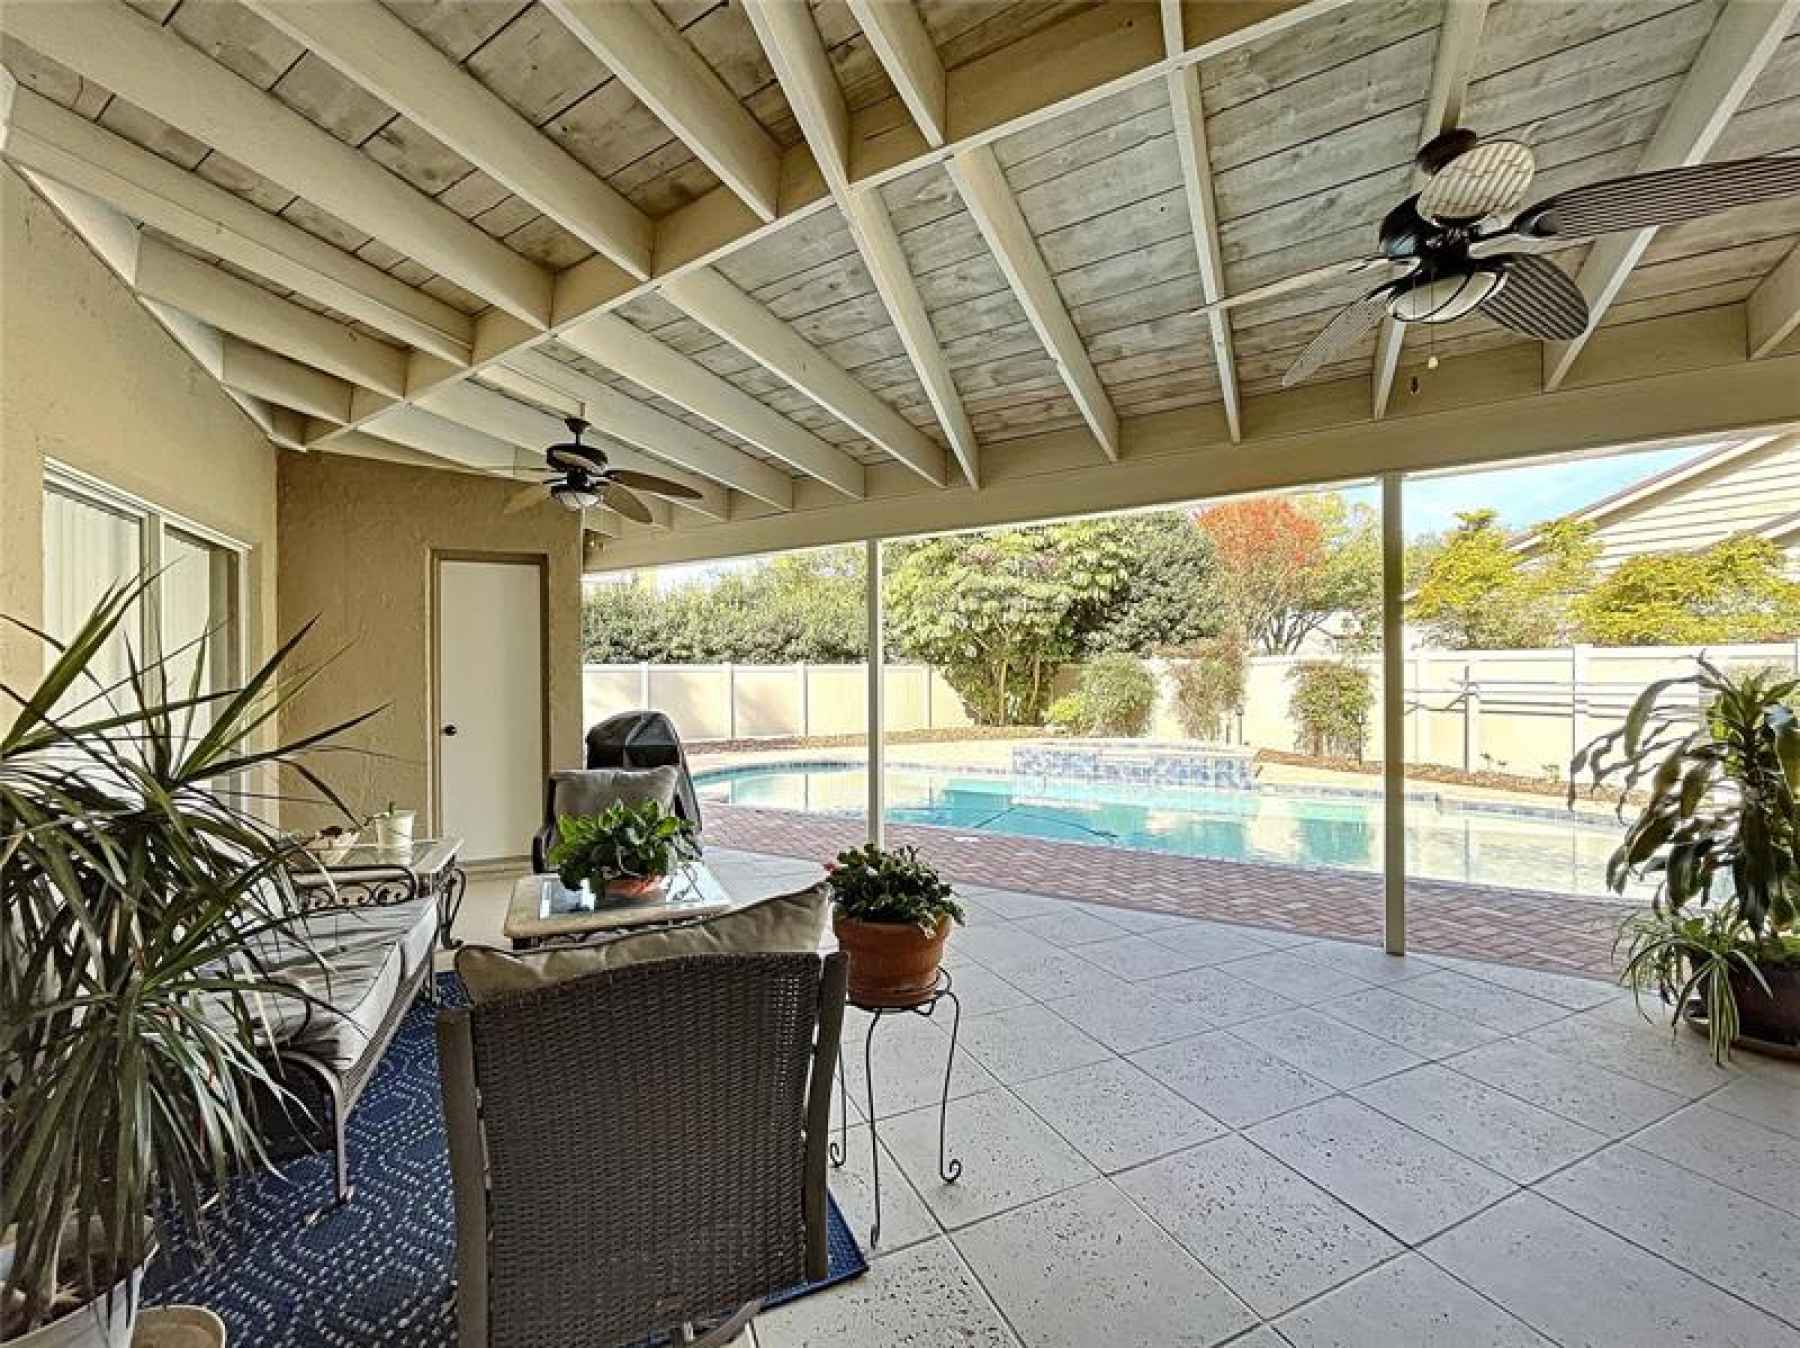 Patio over the pool